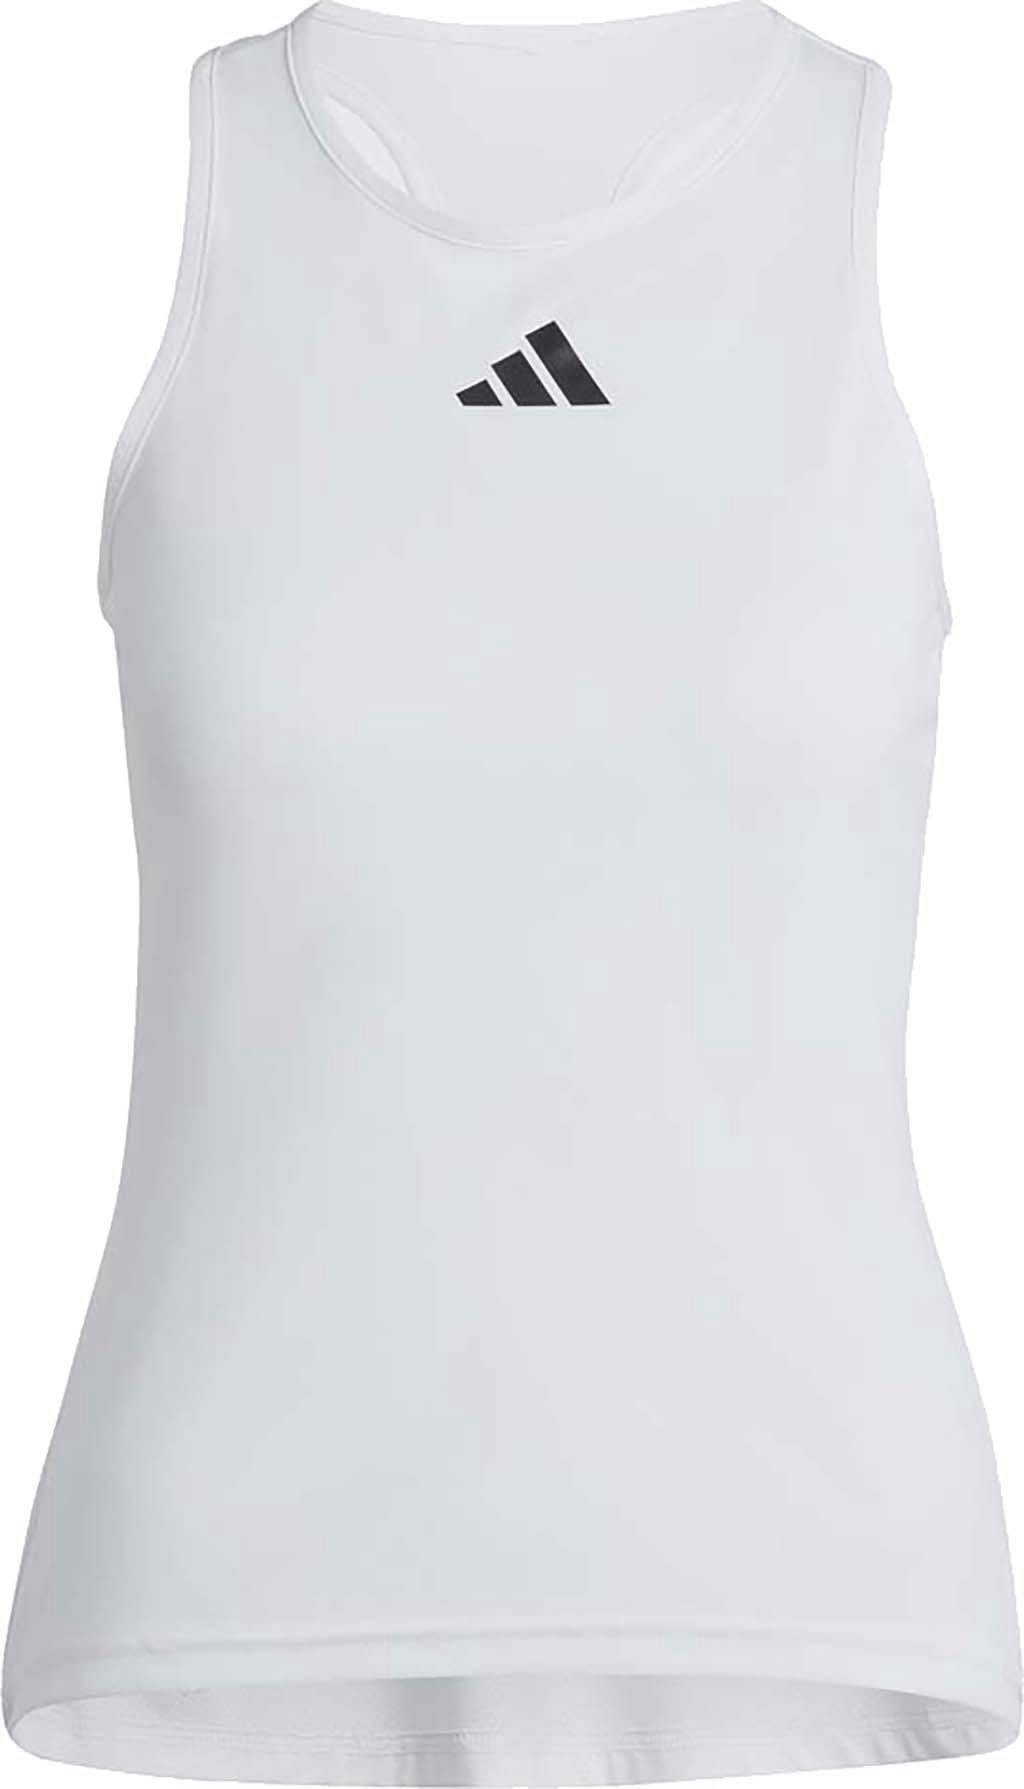 Product image for Club Tennis Tank Top - Women's